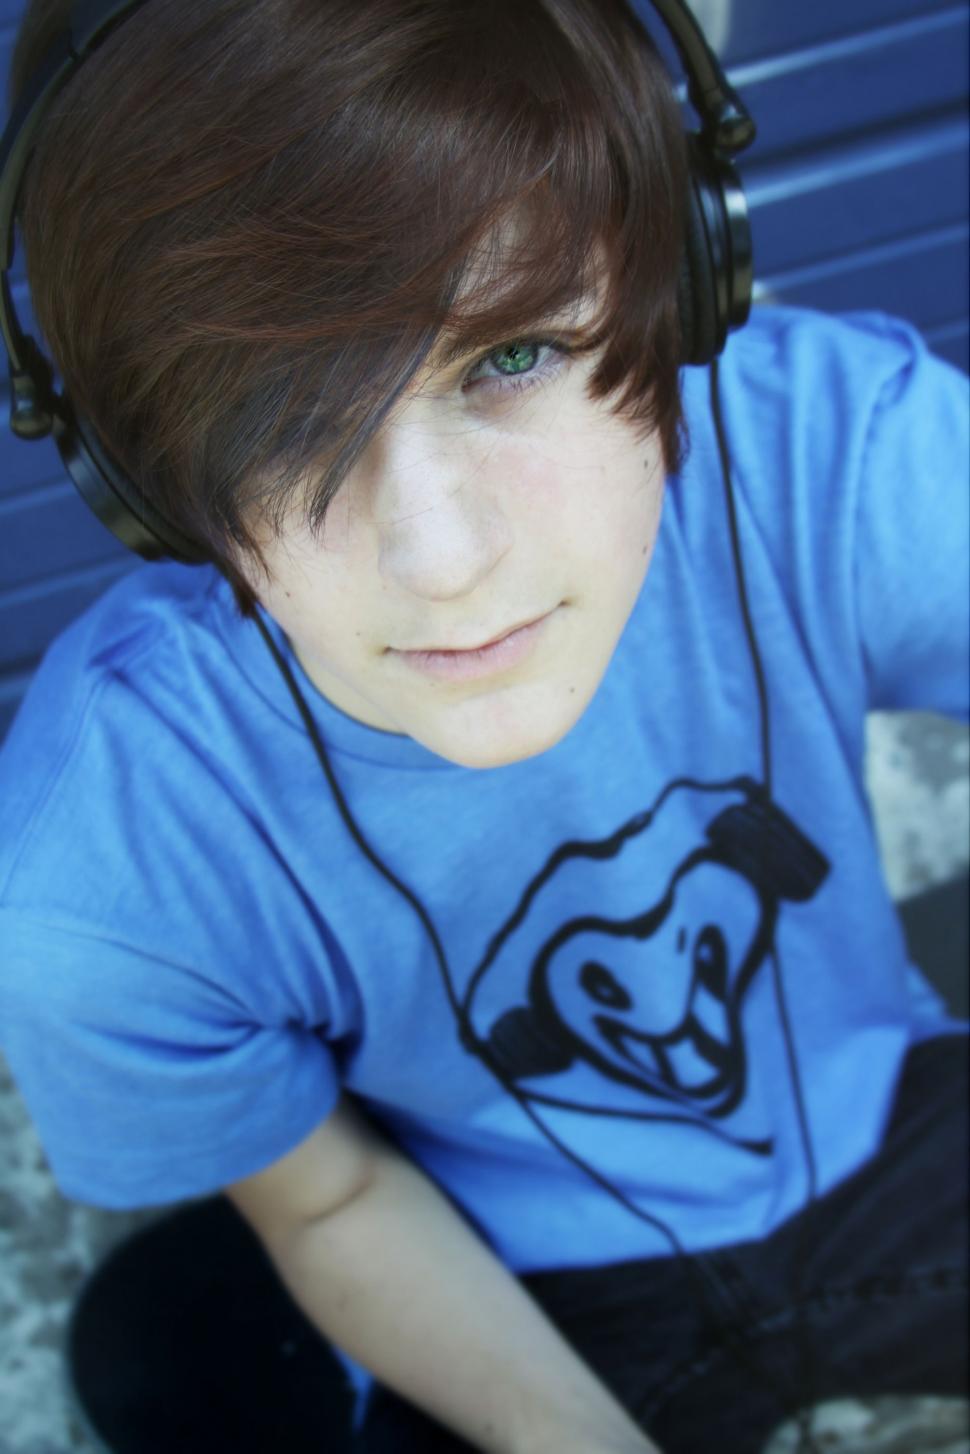 Free Image of Teenage boy with headphones and blue shirt 